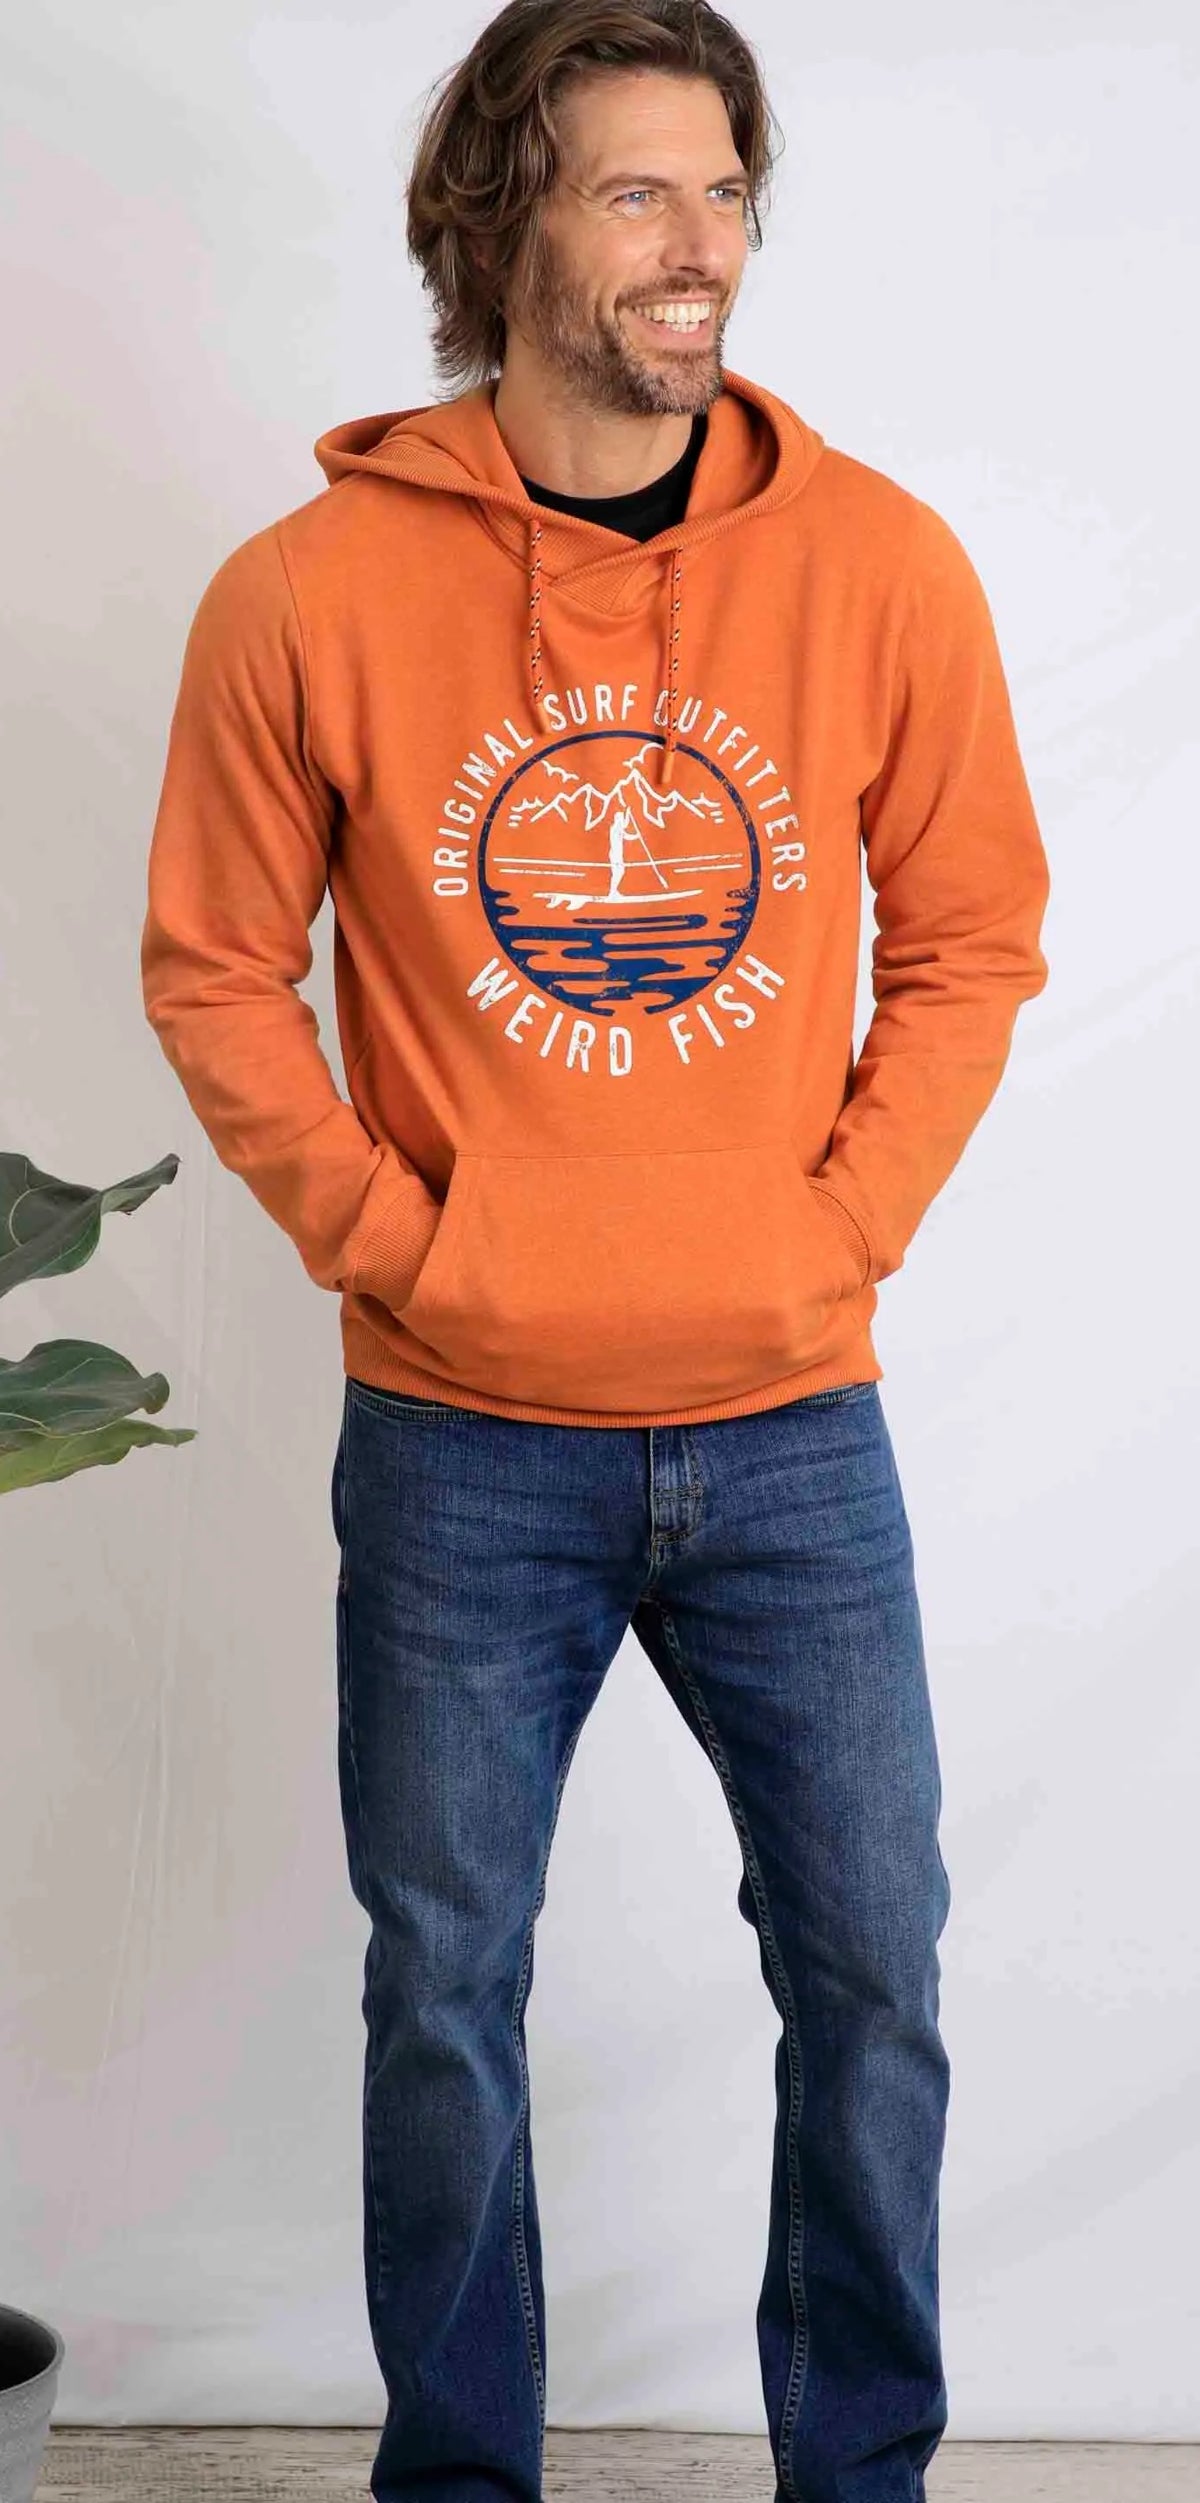 Brick Orange men's Bryant pop over hoody from Weird Fish with paddleboarder printed logo.